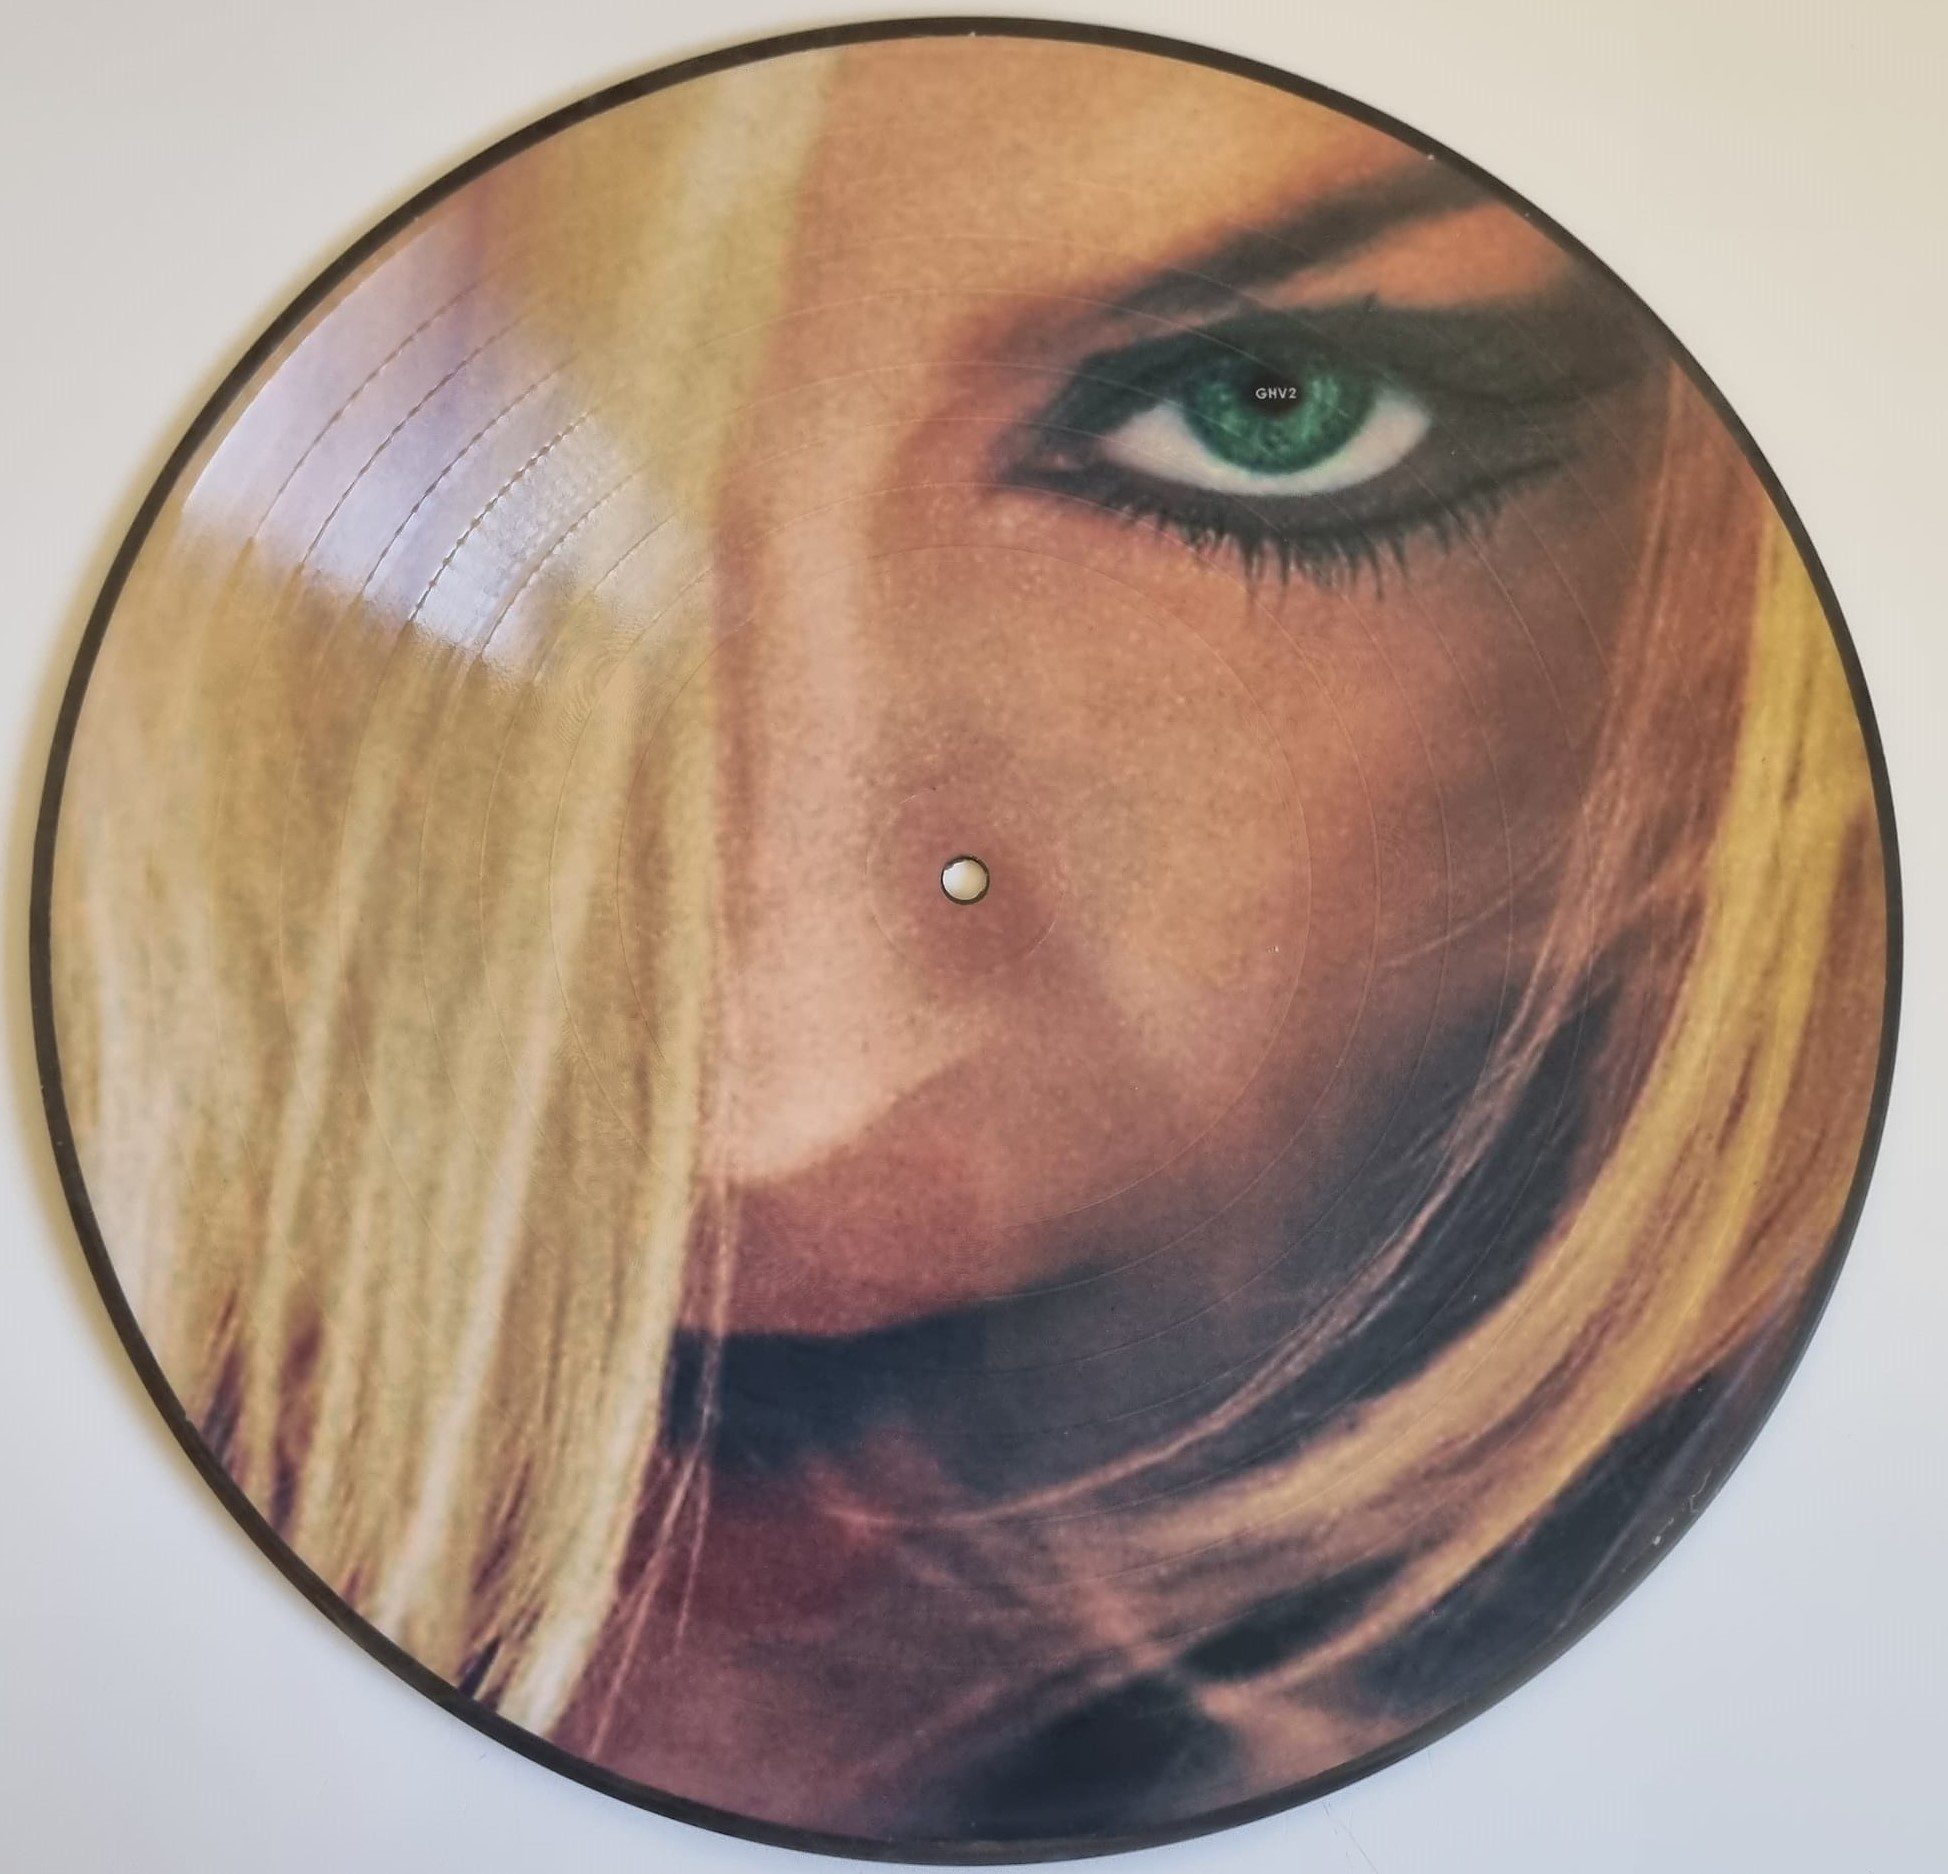 Buy this rare Madonna record by clicking here